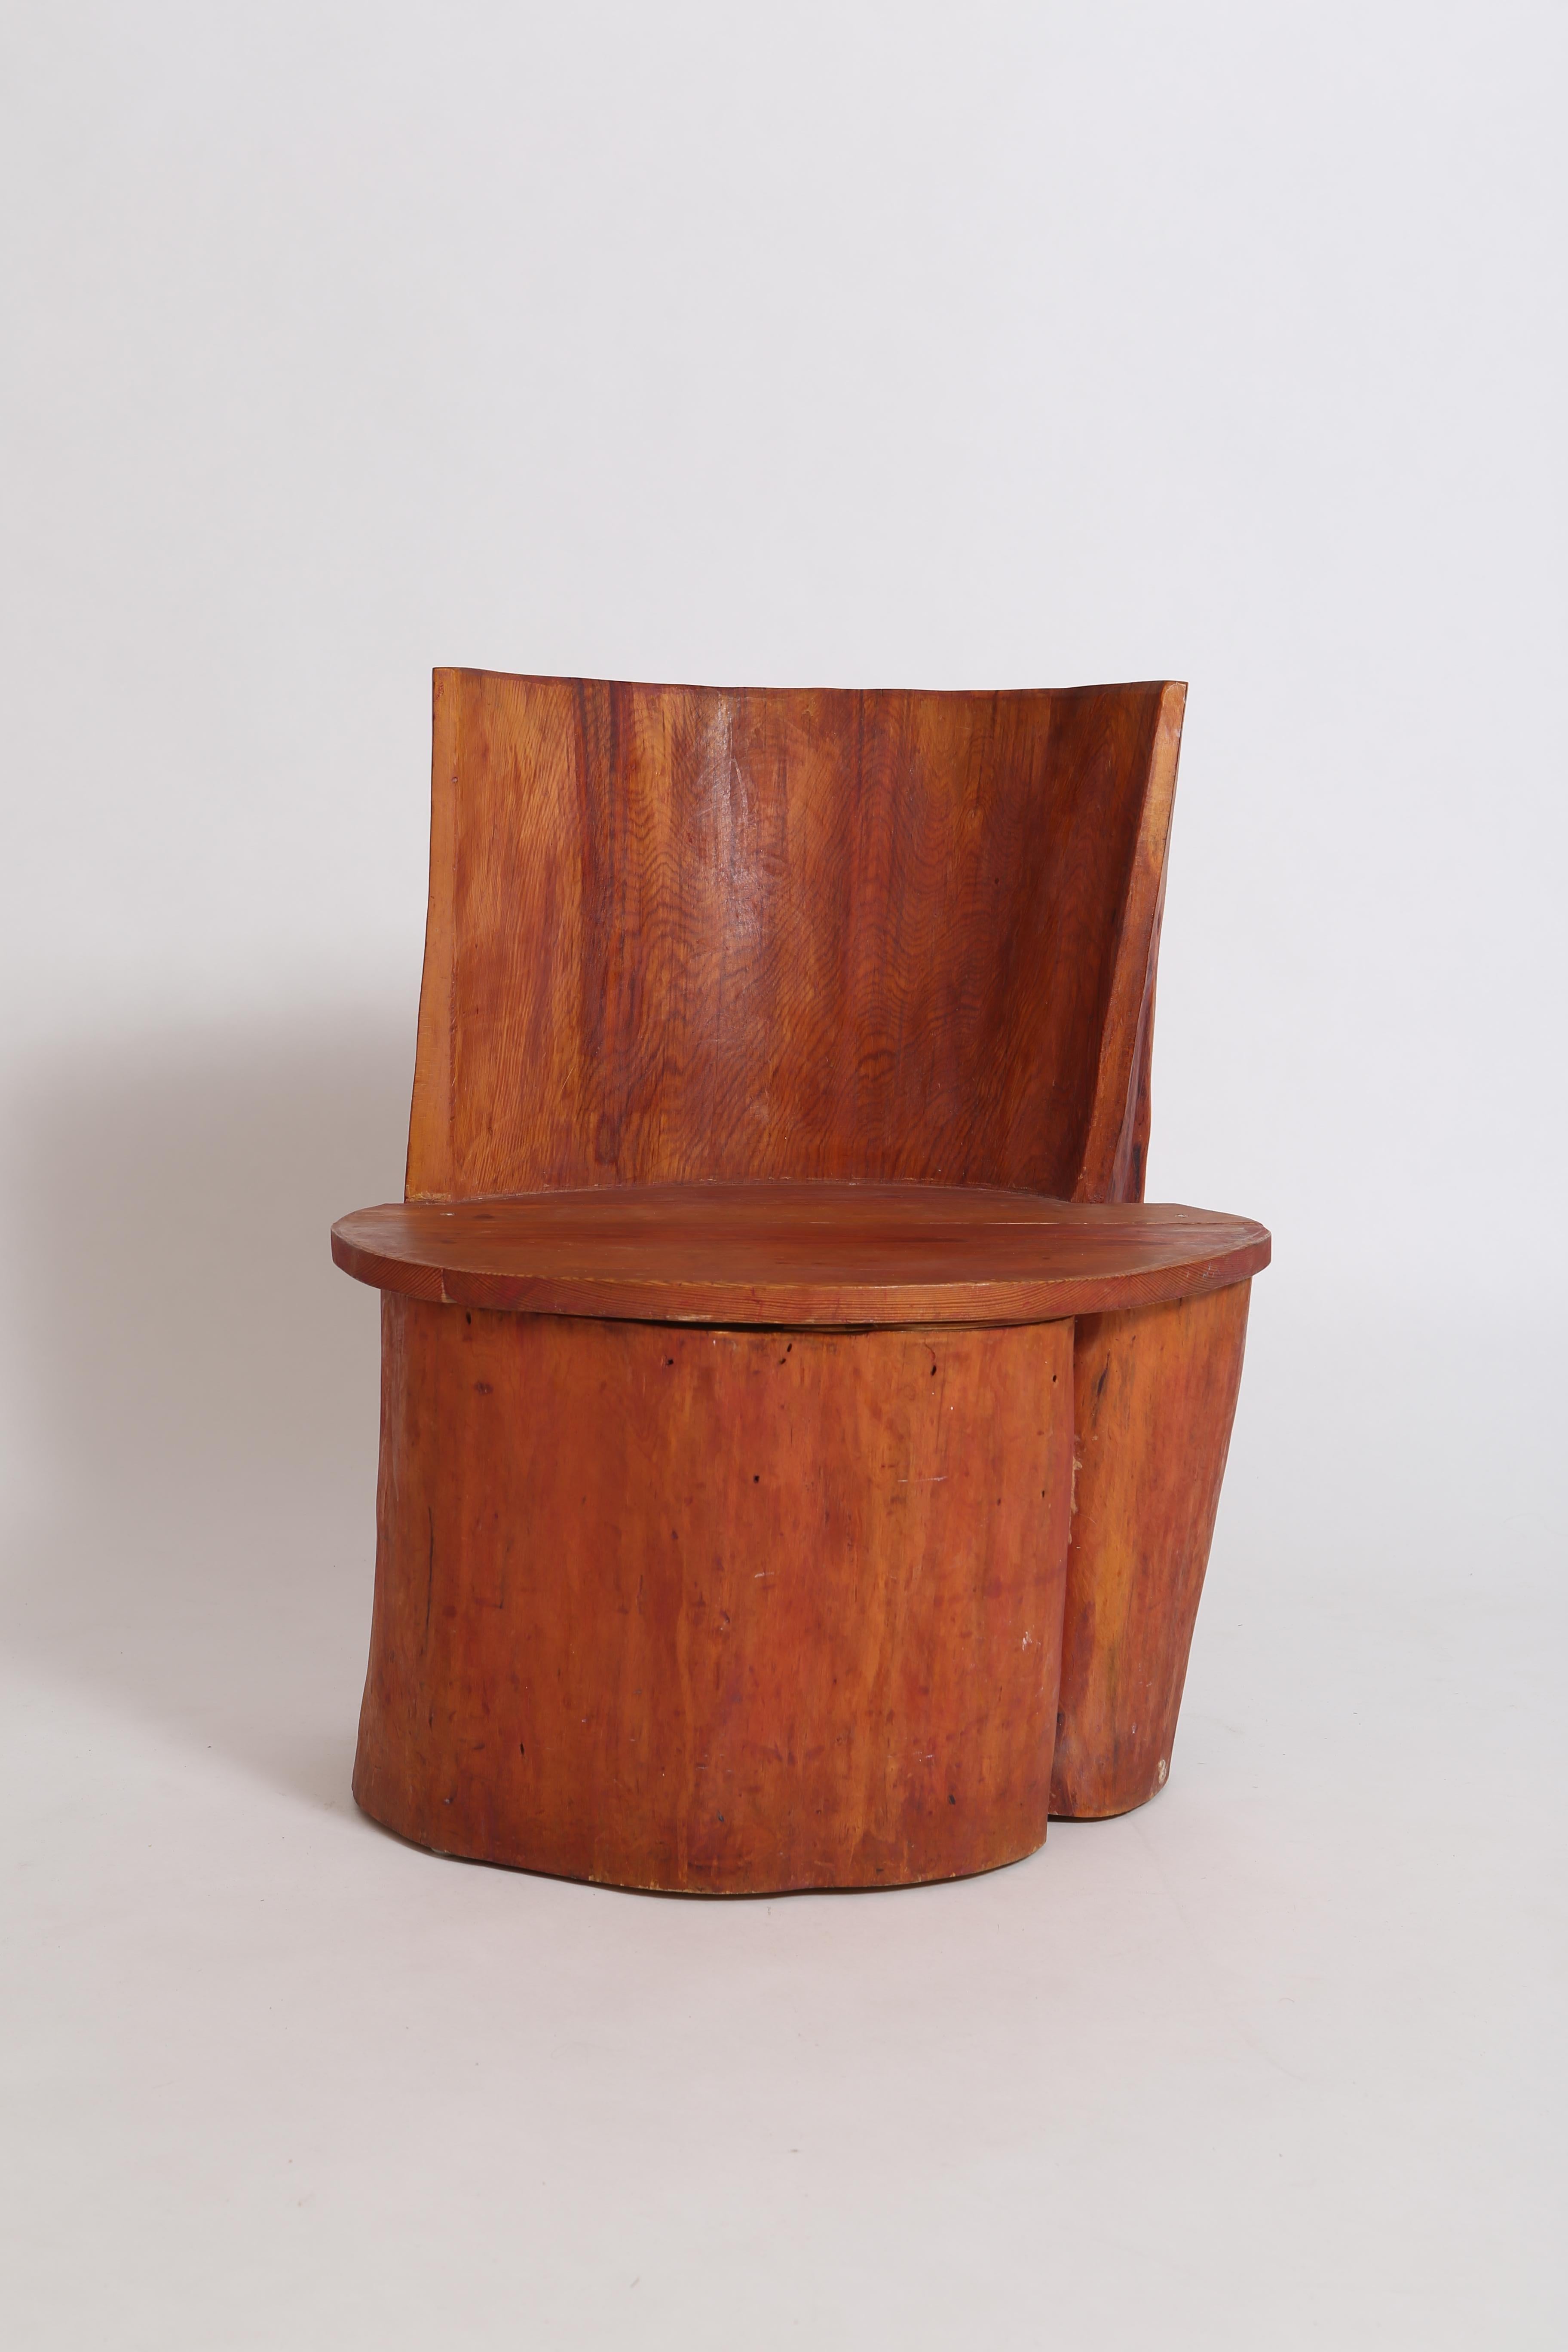 Hand-crafted pine chair with storage. Made in Denmark circa 1970s. Stained pine. So fun!
Wizard wave organic modernist statement chair perfect for outside of a sauna or in a guest bathroom. 